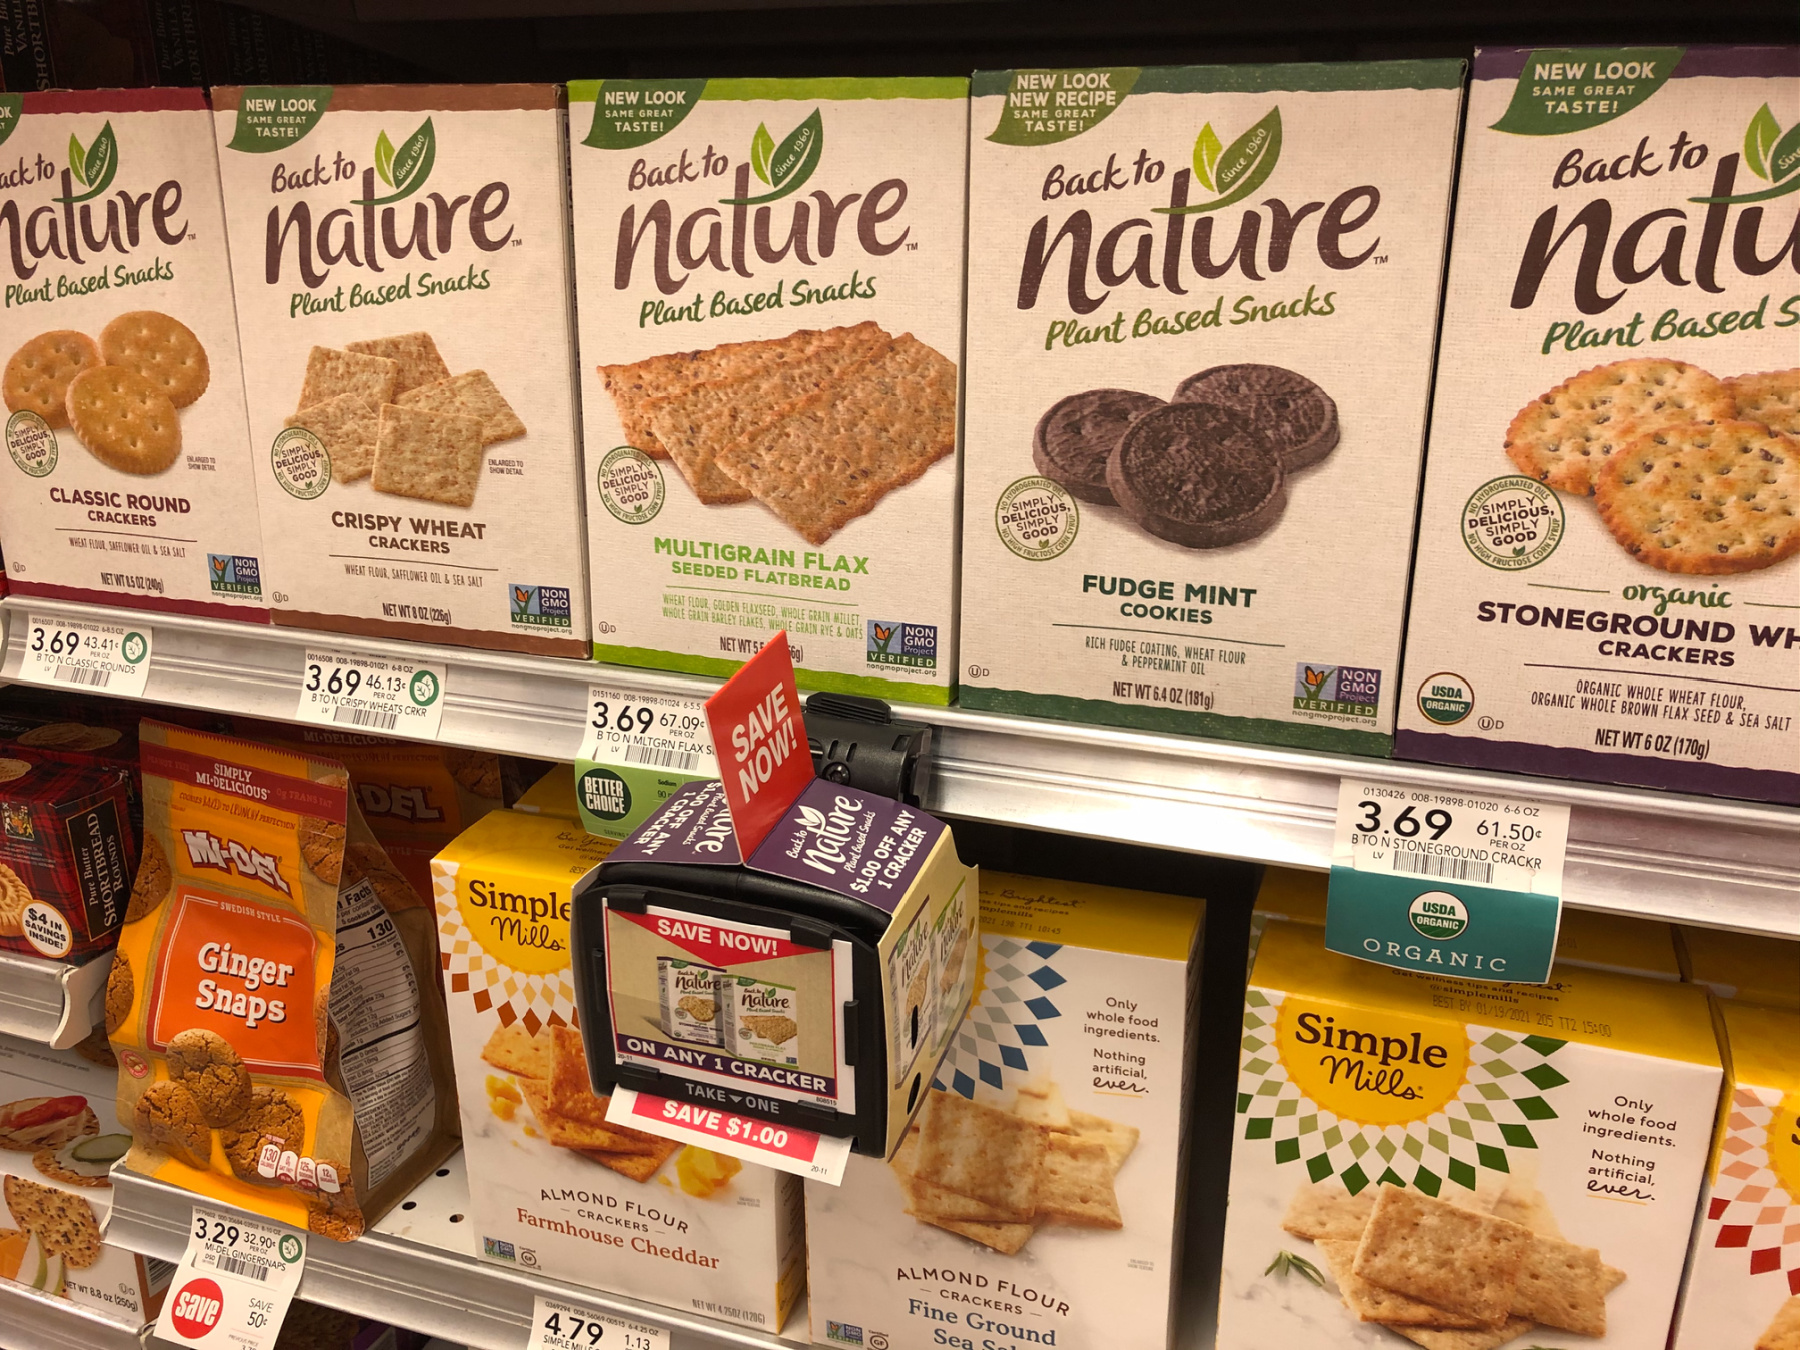 Try My Mint Chocolate Chip Cheesecake Squares & Get Savings On Back To Nature™ Snacks At Publix on I Heart Publix 1